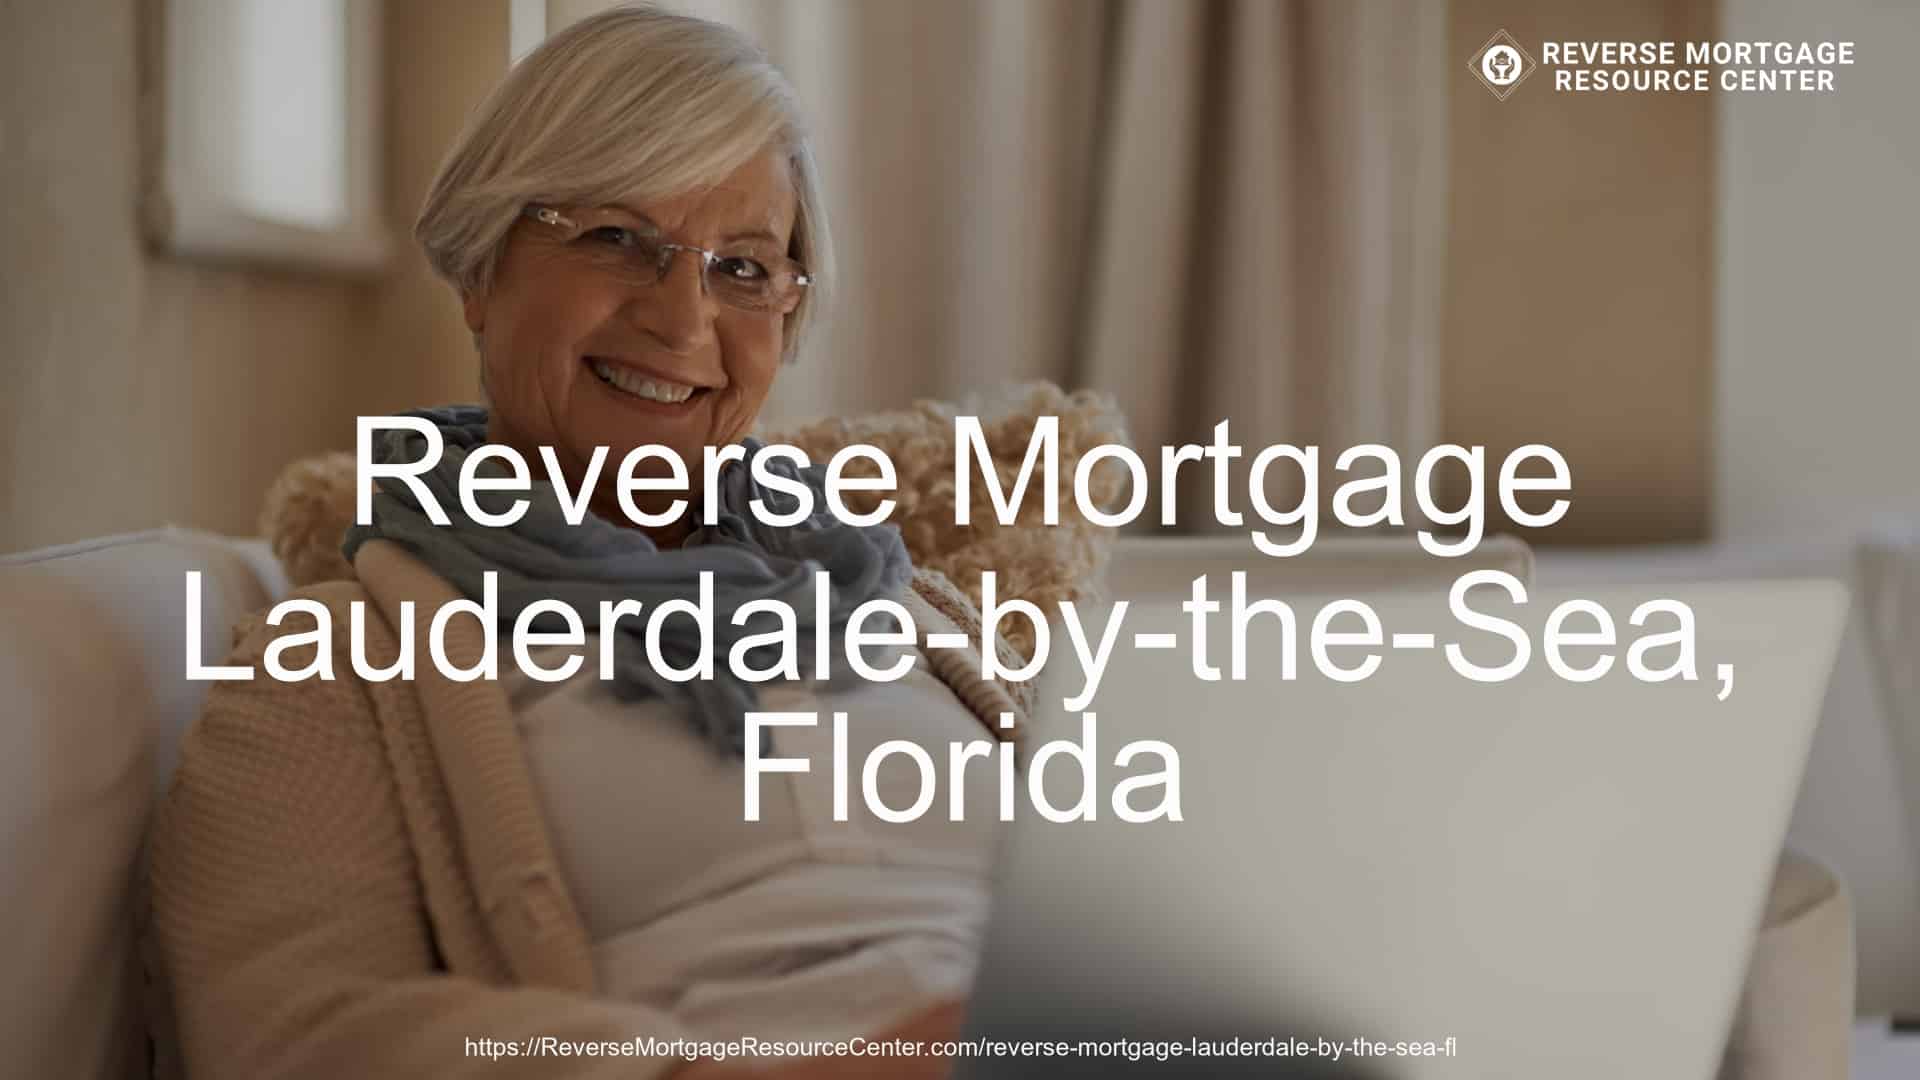 Reverse Mortgage in Lauderdale-by-the-Sea, FL